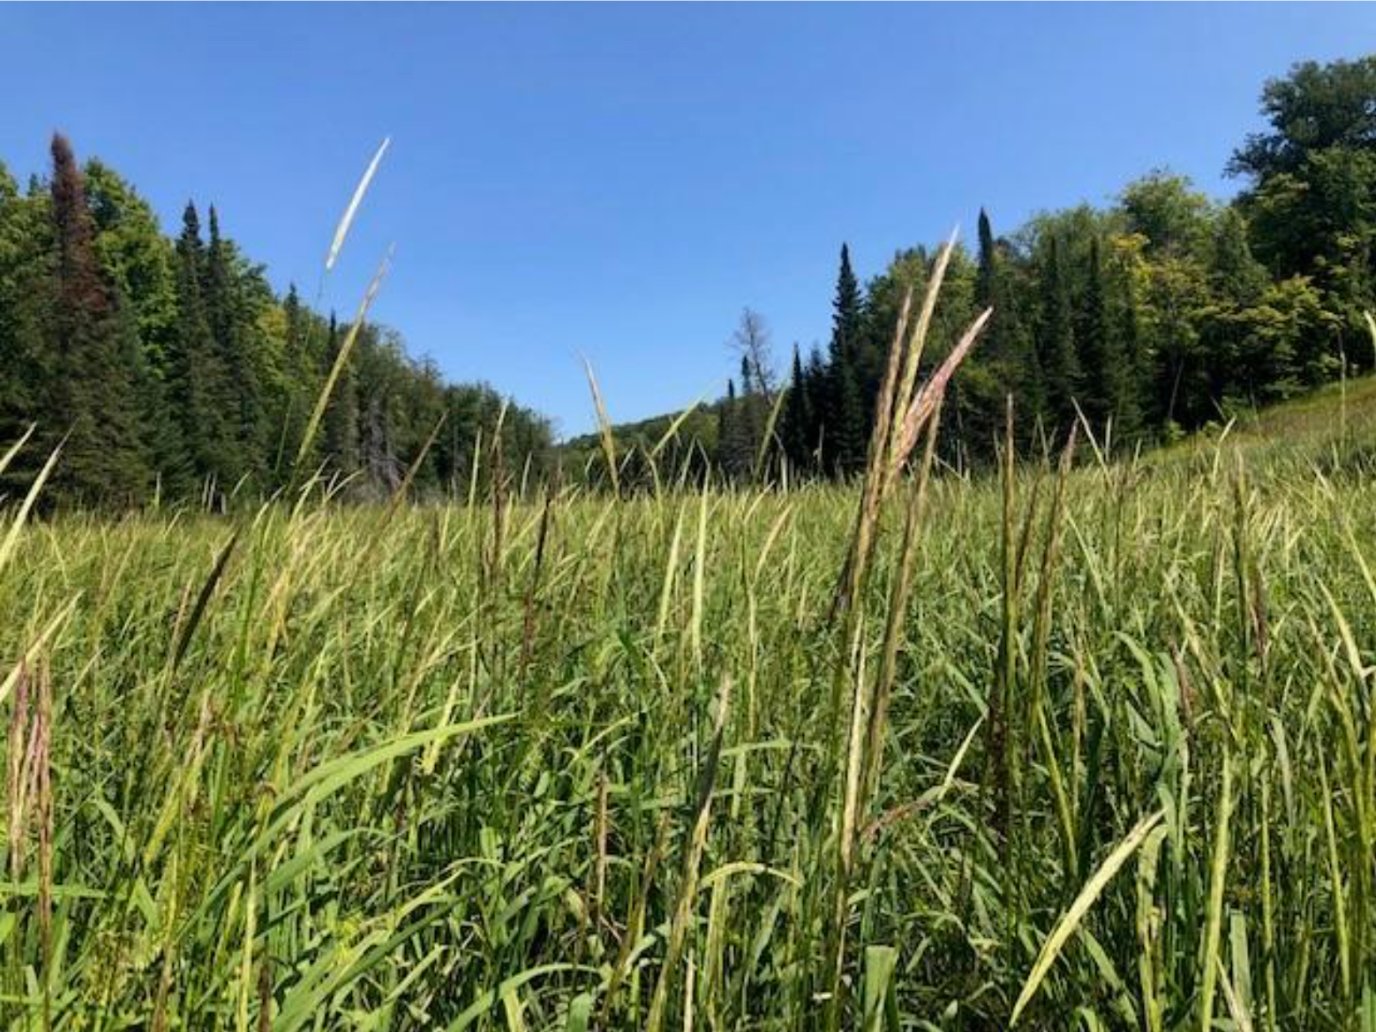 Toxic metals from mining near Keweenaw Bay were found in local wild rice beds, like this one at Lake Plumbago in Baraga County.